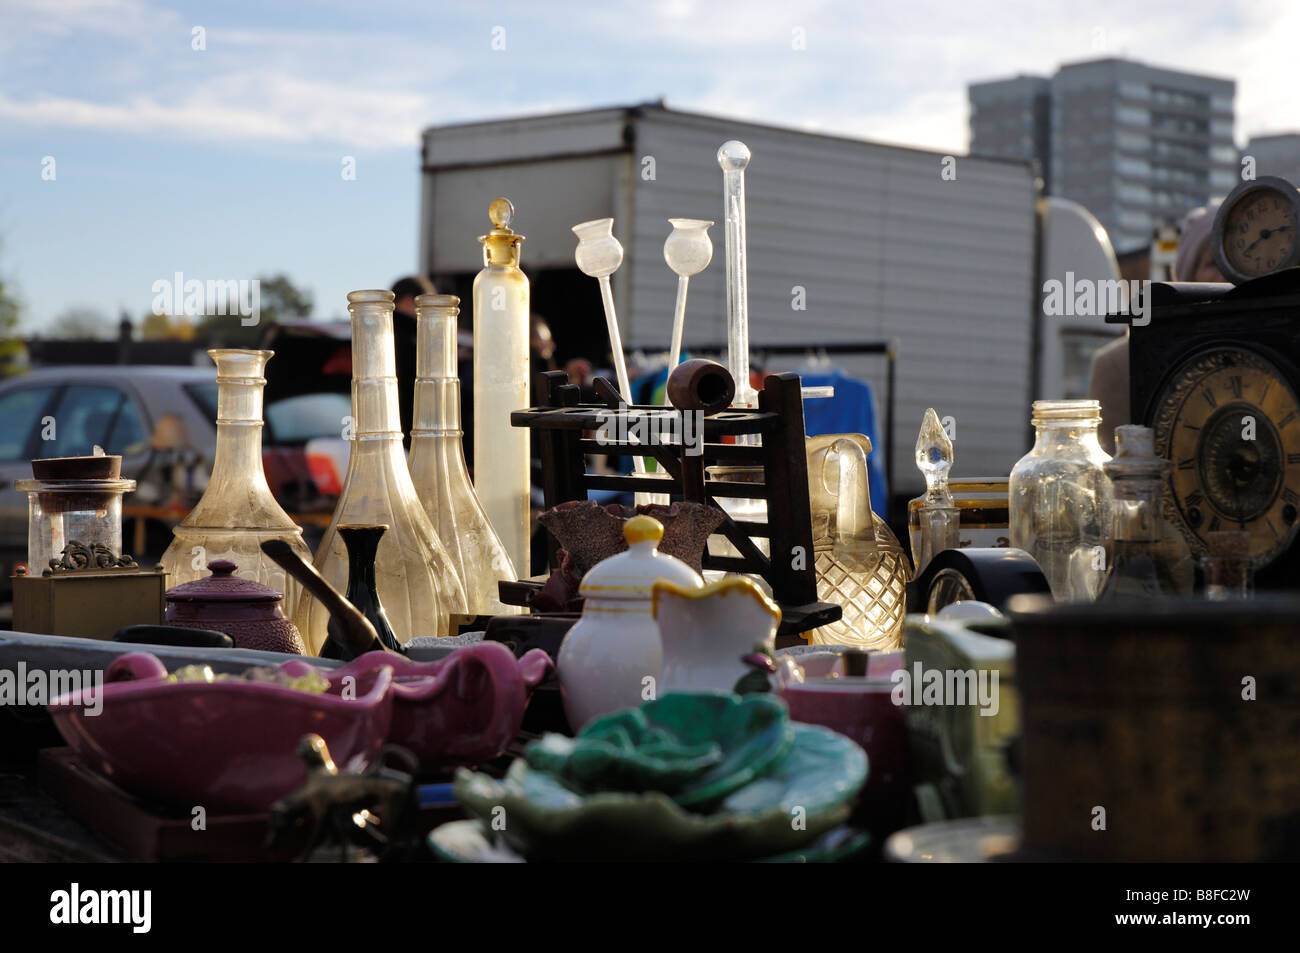 Secondhand And Antique Goods On Sale Early In The Morning At A Car Boot Sale Or Market In London England Stock Photo Alamy